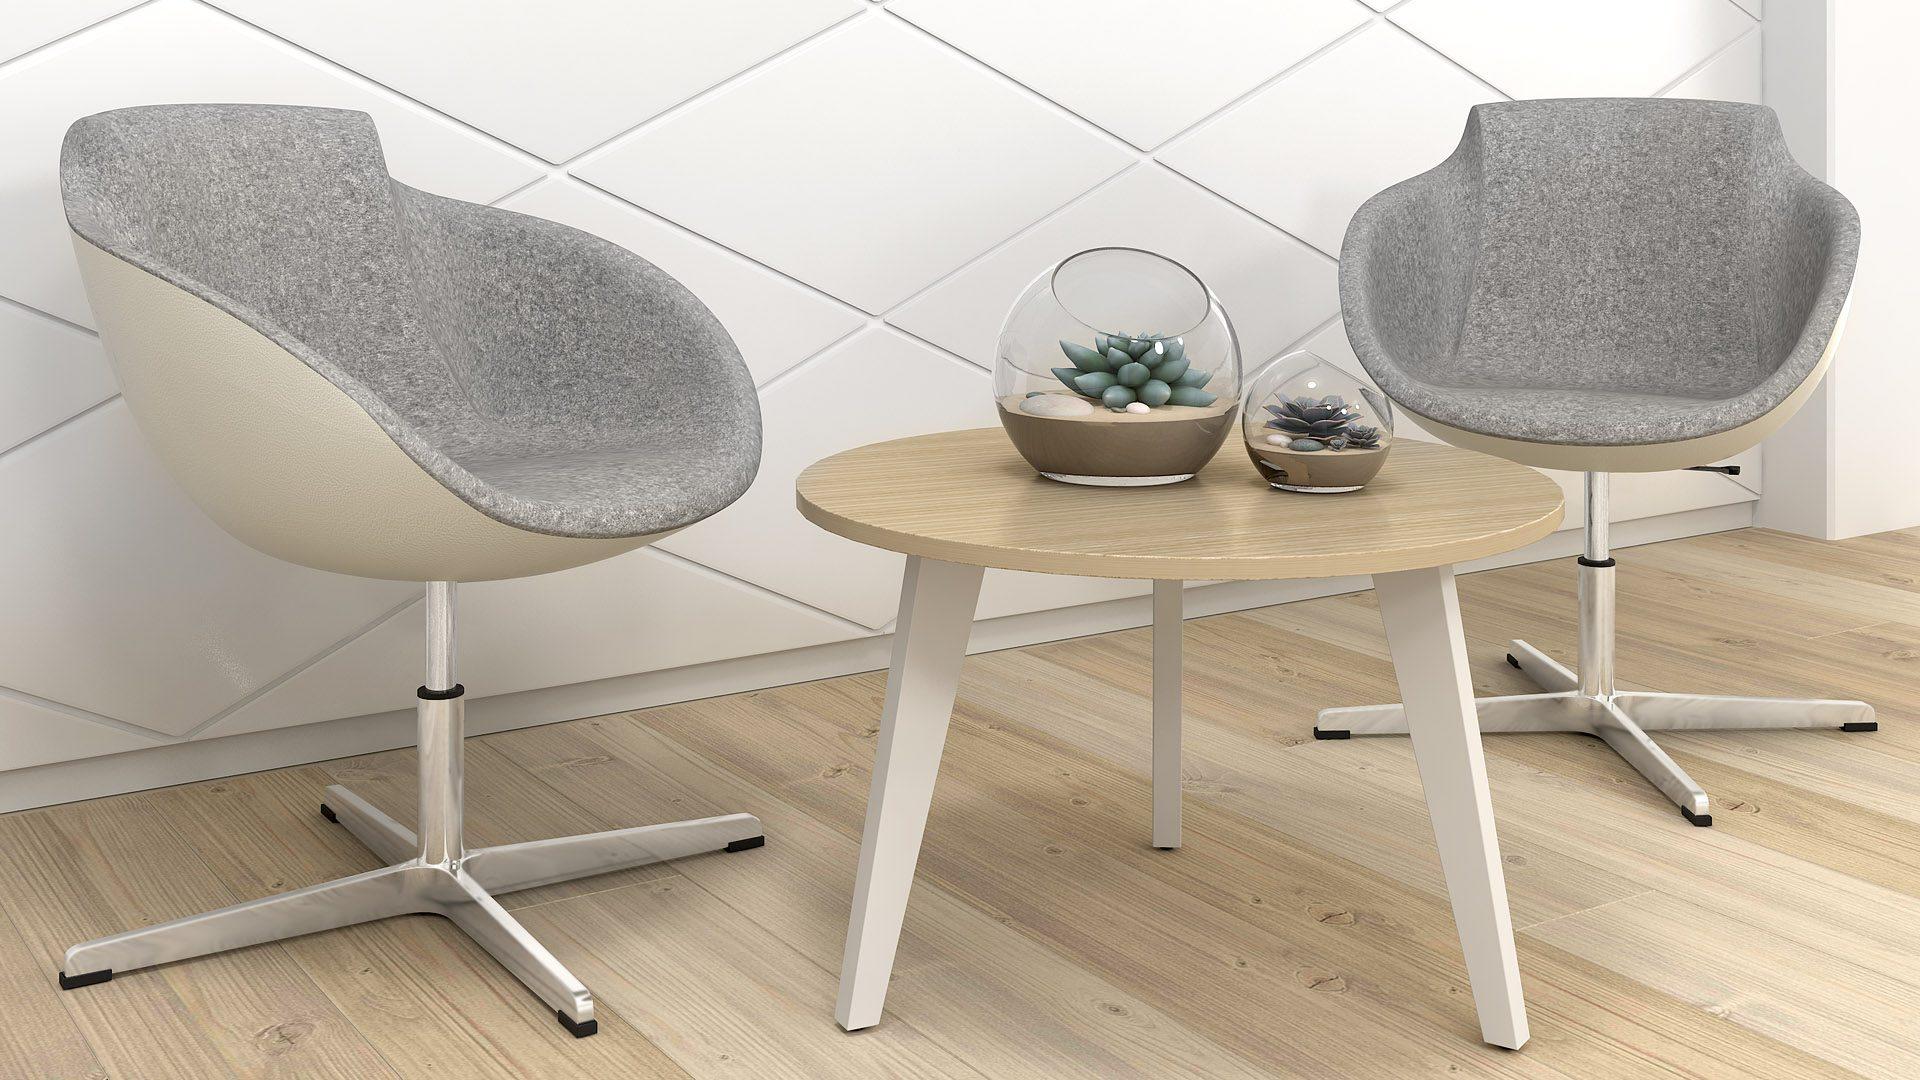 Tula armchairs in white and grey with Amber coffee table